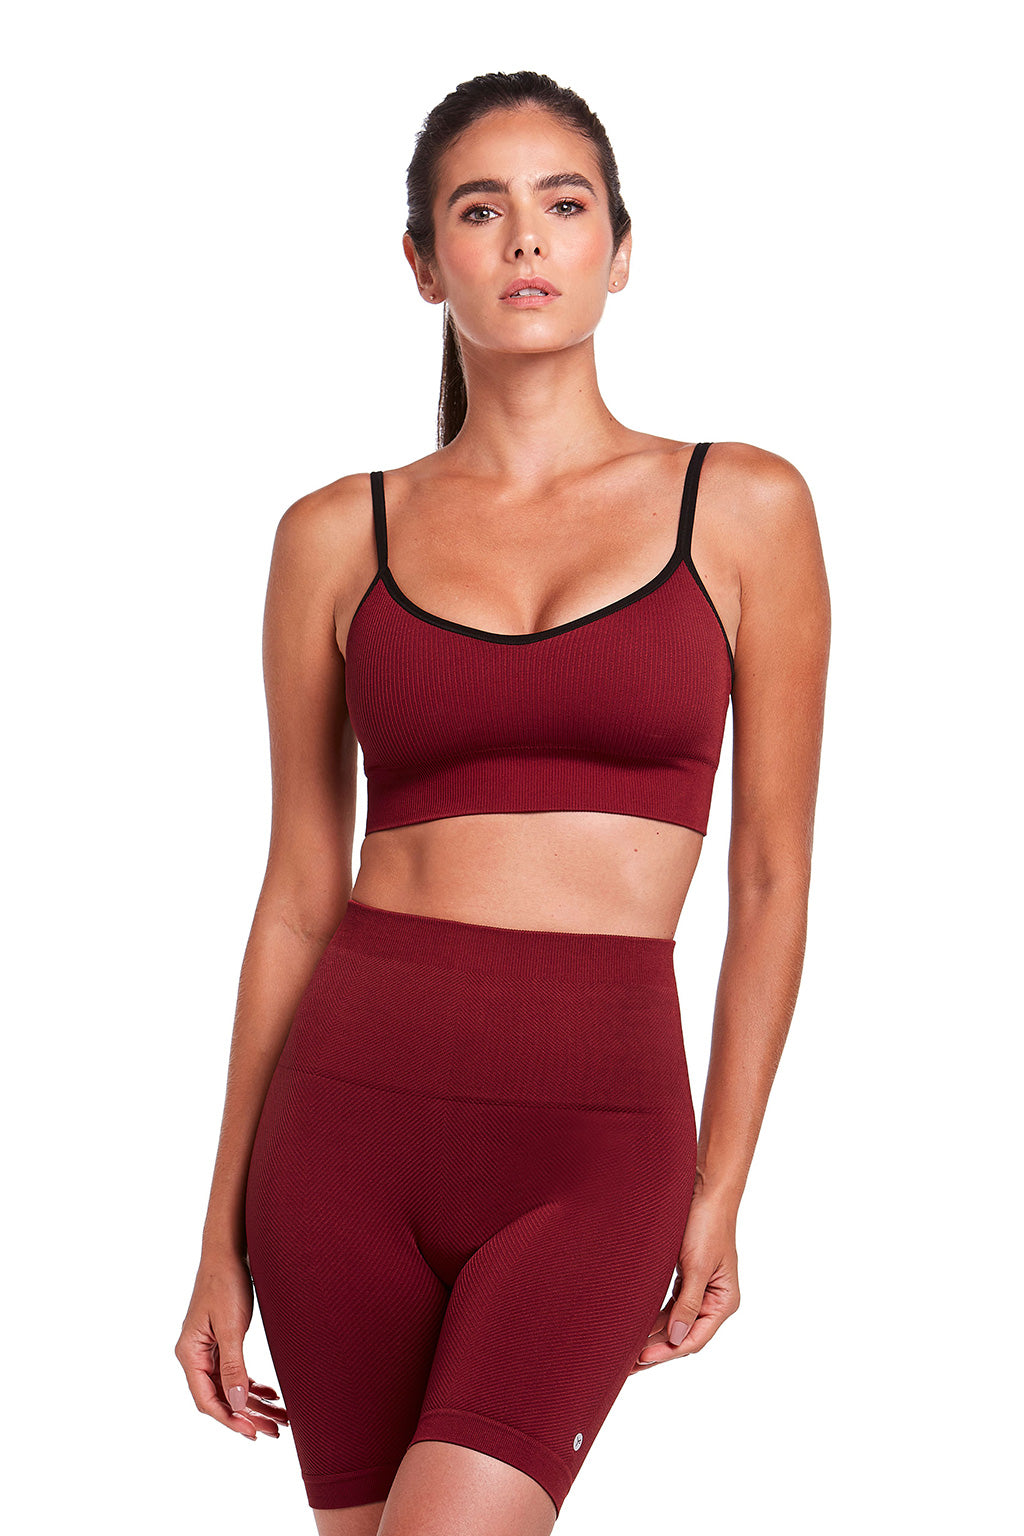 Brazilian Top Fitness Twill Sports Bra with Removable Pad